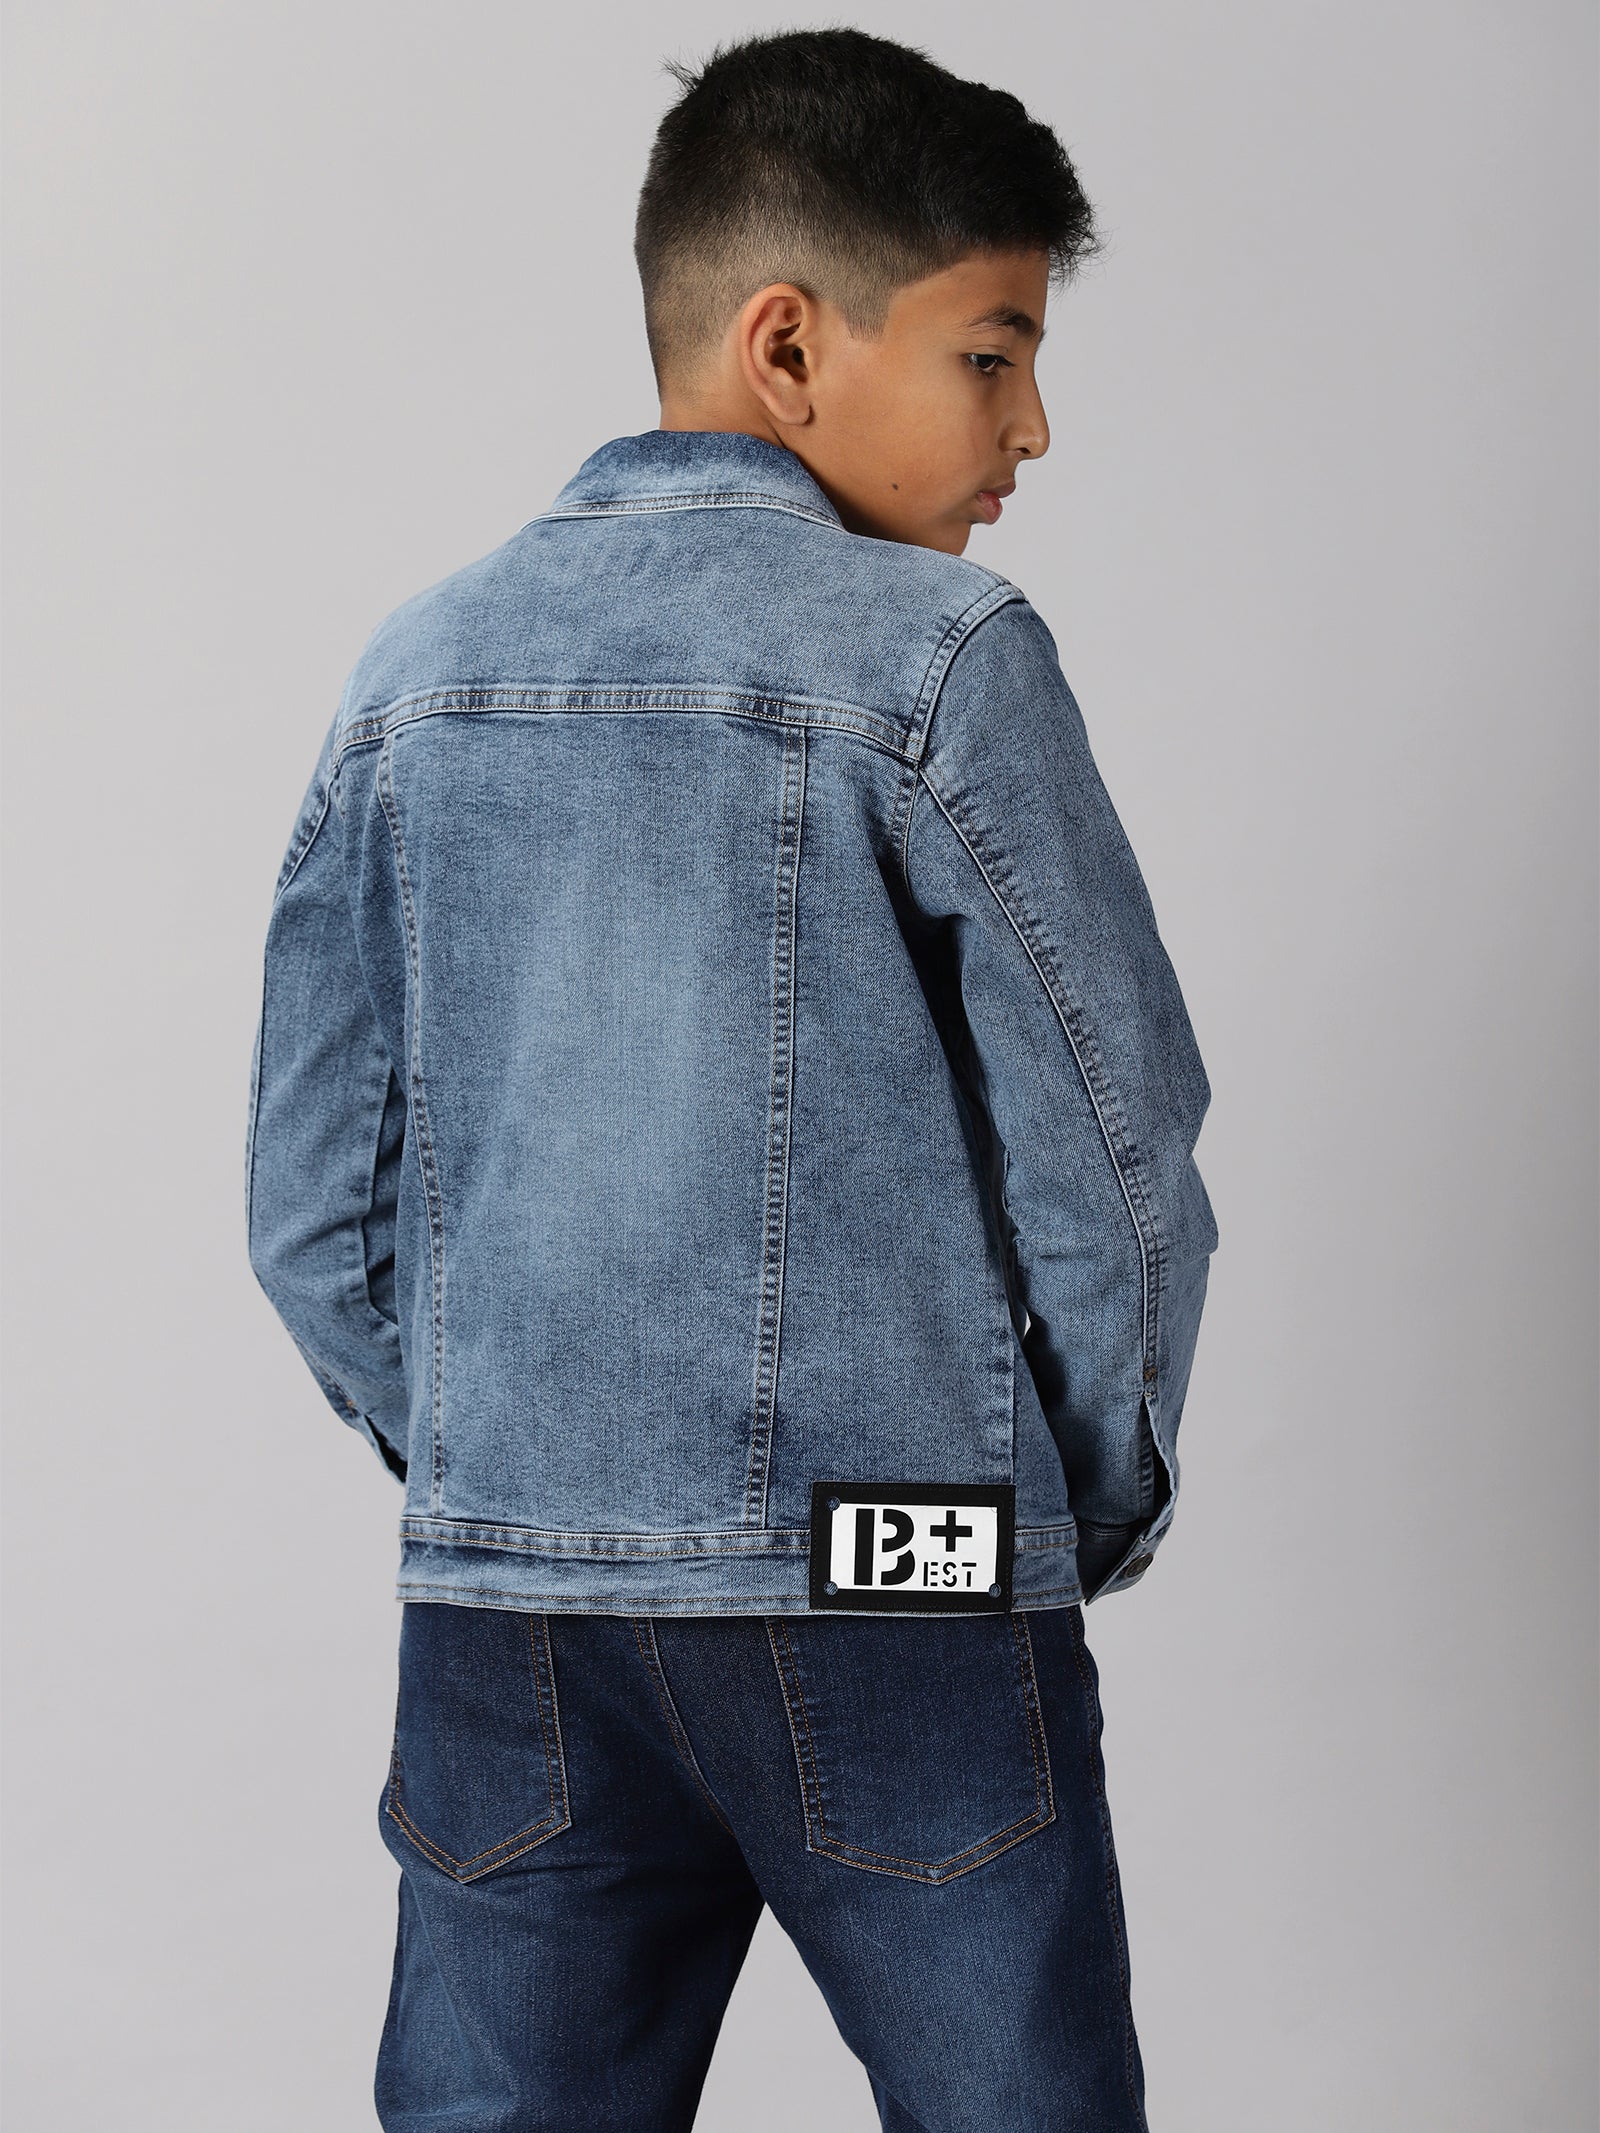 Buy Abolai Baby Boys' Basic Denim Jacket Hoodie Button Down Jeans Jacket  Top, Style2 Blue, 3T at Amazon.in